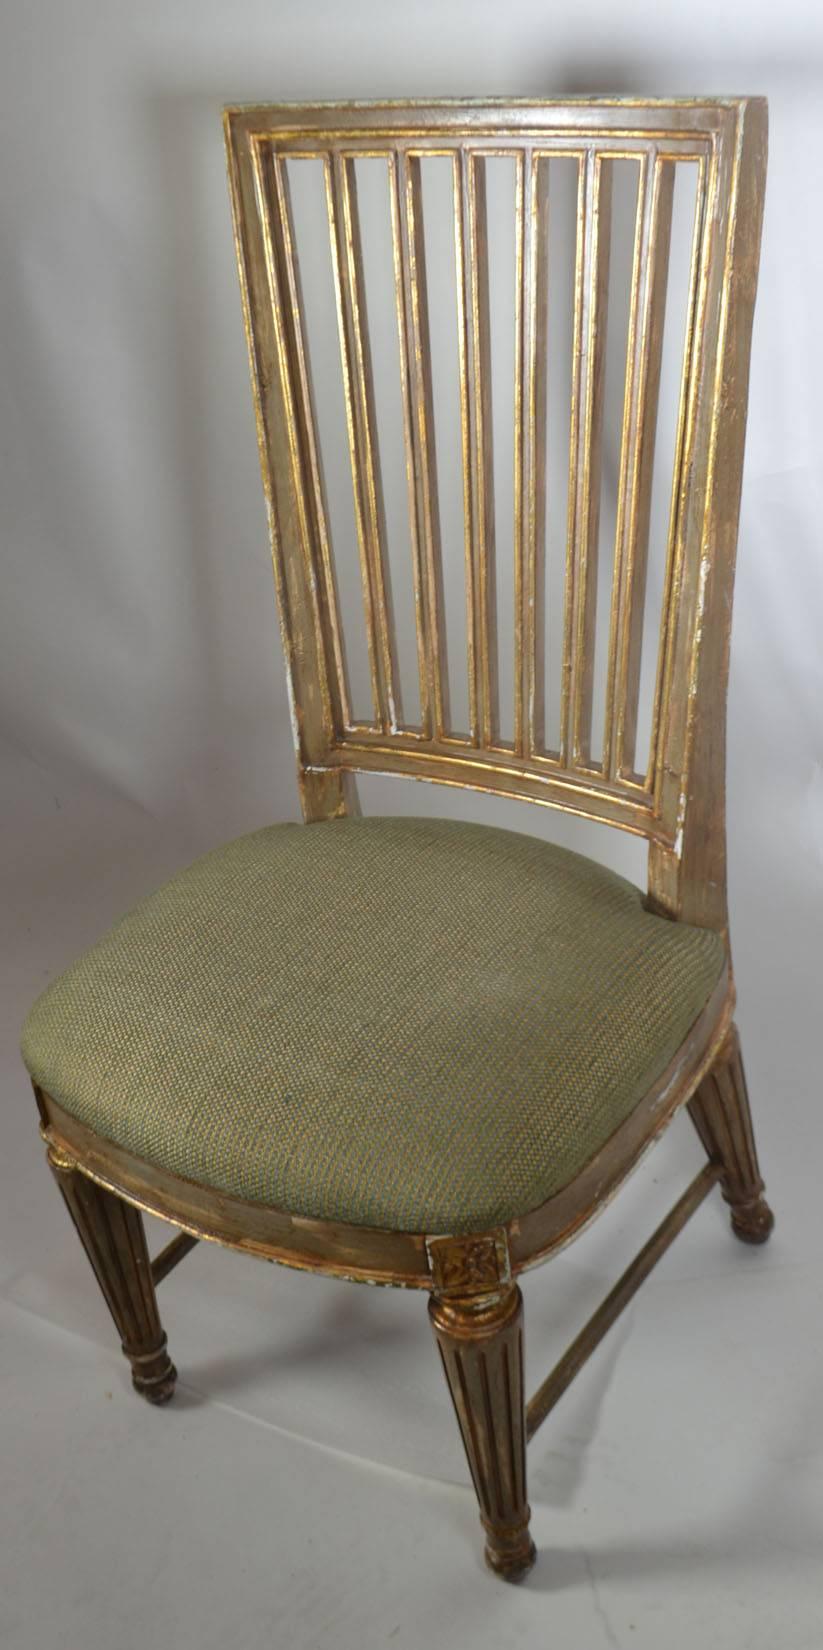 Suite of eight parcel-gilt and polychromed dining chairs, of Italian neoclassical inspiration, comprised of a pair of armchairs and six side chairs, each with a molded framed back with vertical slats, bowed seat and tapering fluted legs.